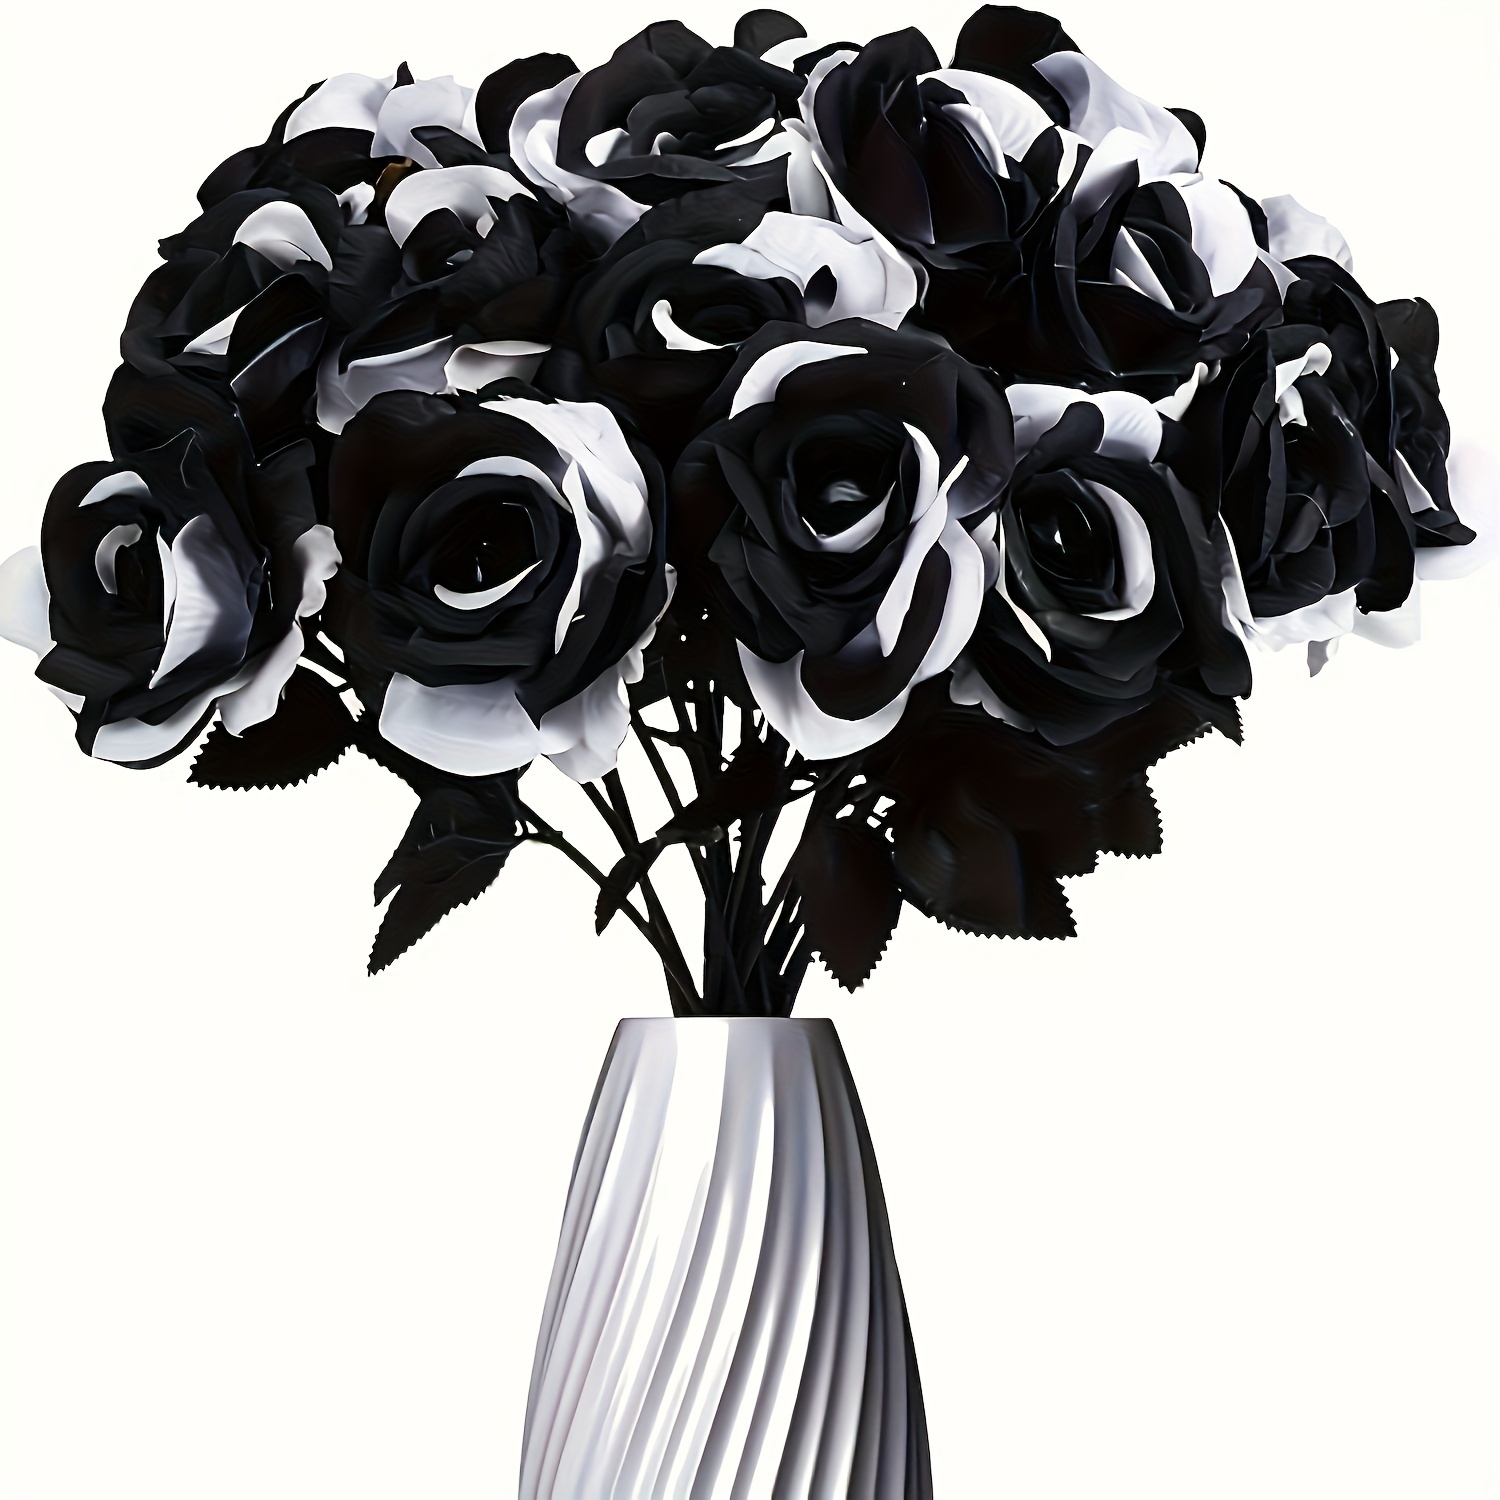 

12pcs Black Rose Artificial Flowers, Single Stemmed Fake Flower Bridal Bouquet, Realistic Flowers For Home Garden Parties, Halloween Christmas Decorations (black And White)